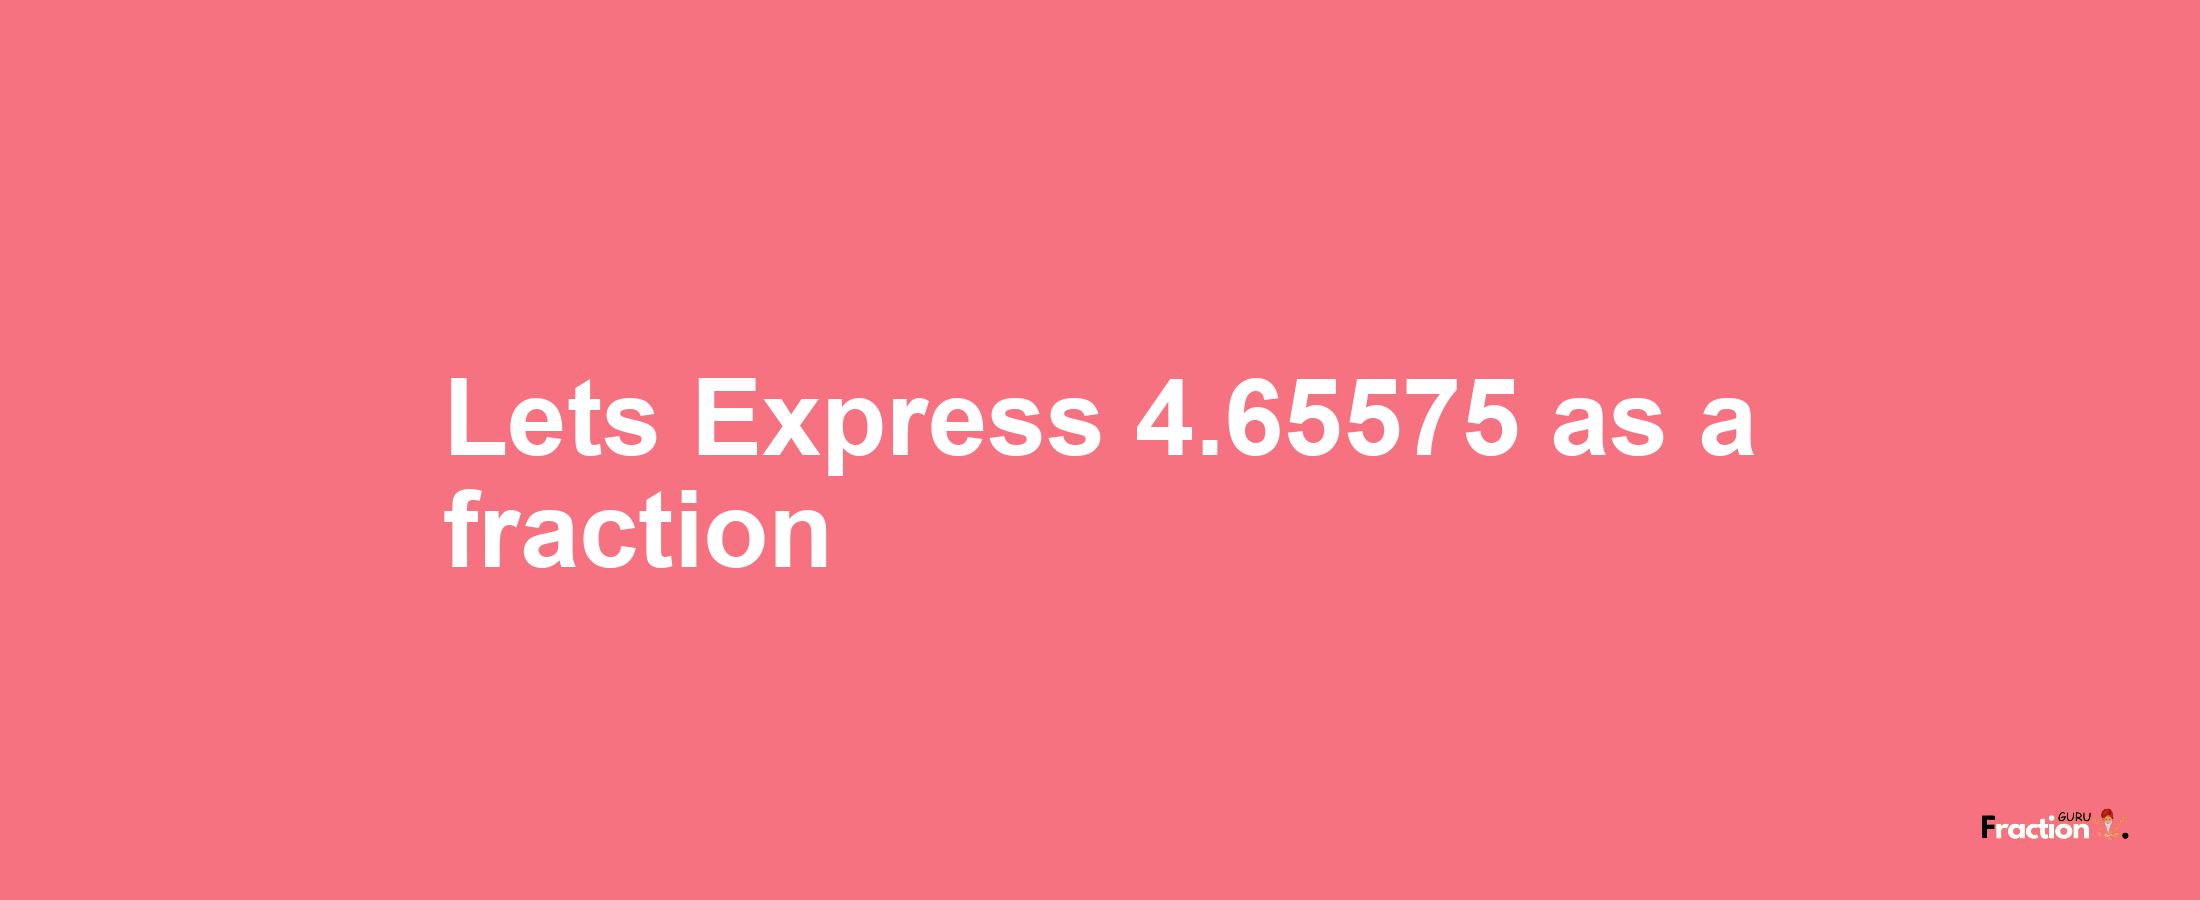 Lets Express 4.65575 as afraction